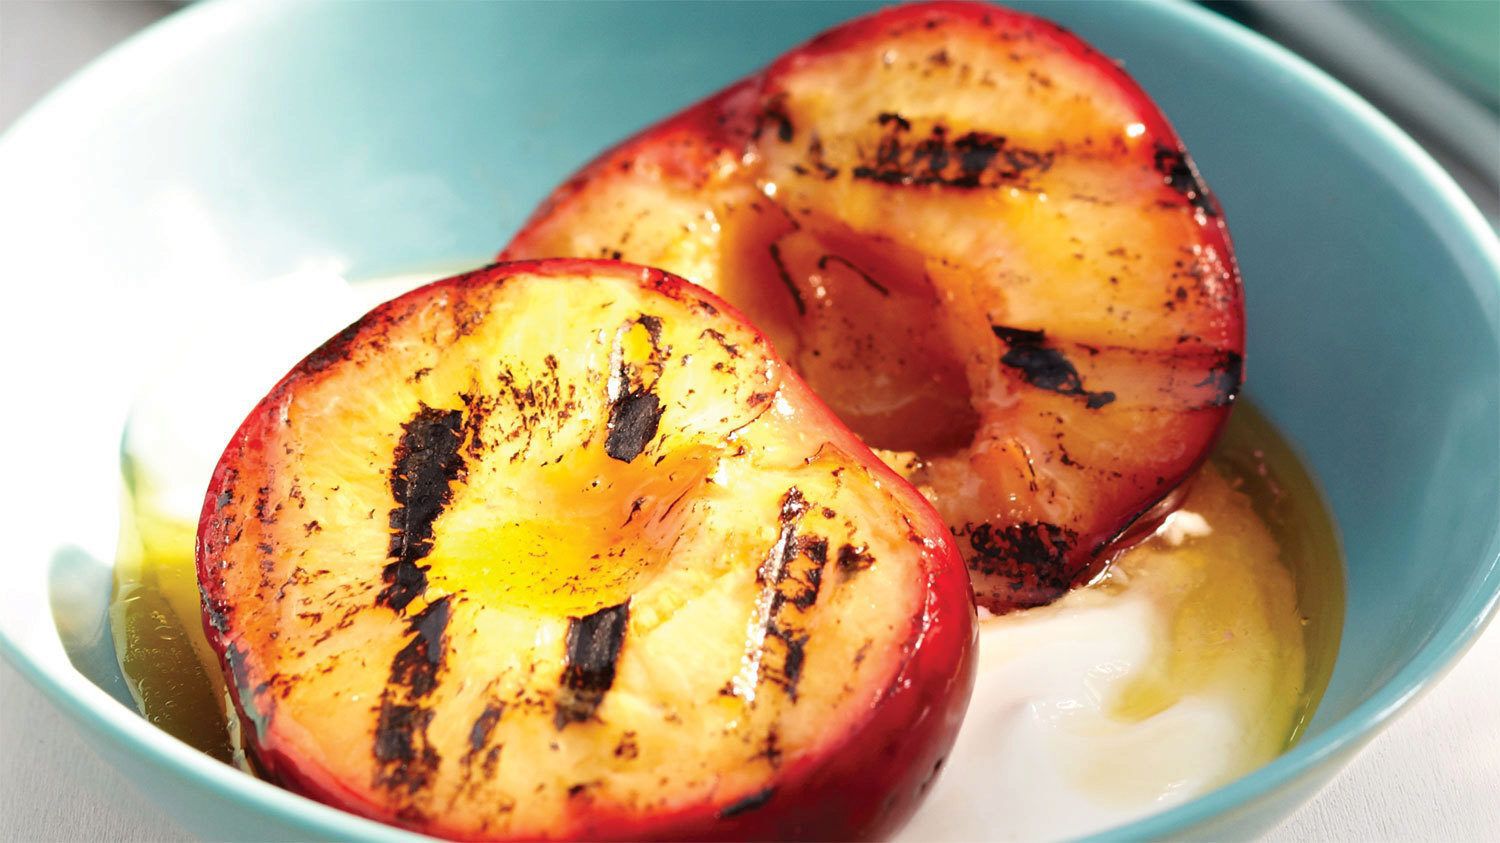 Grilled Plums with Yogourt & Spiced Maple Syrup